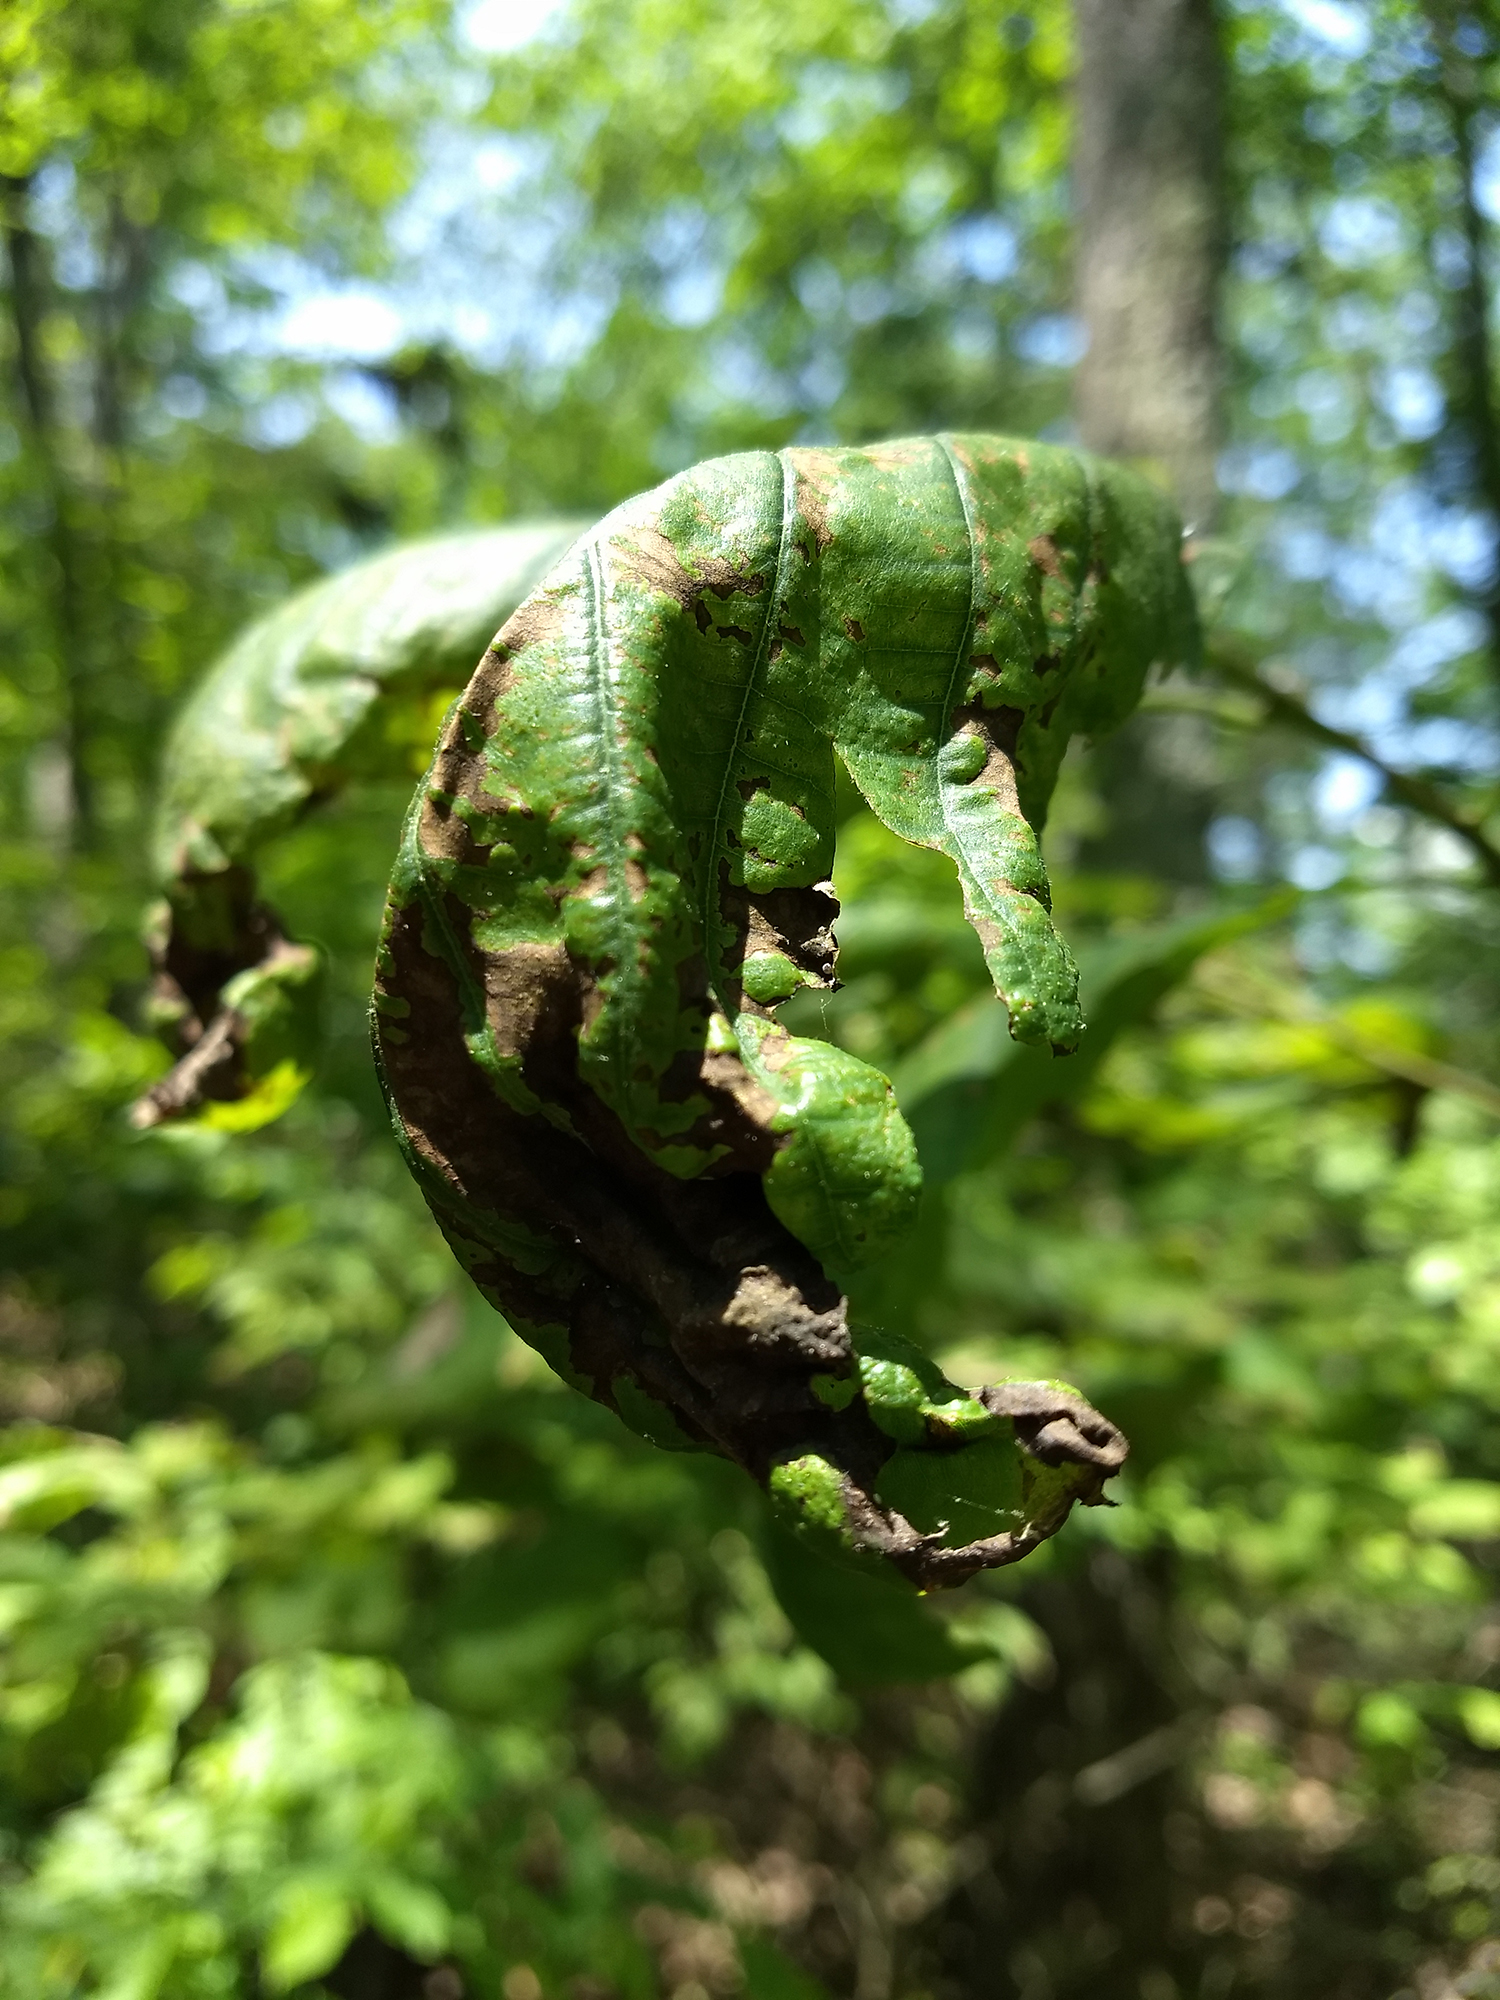 Numerous reports this season of oak anthracnose in central Pennsylvania